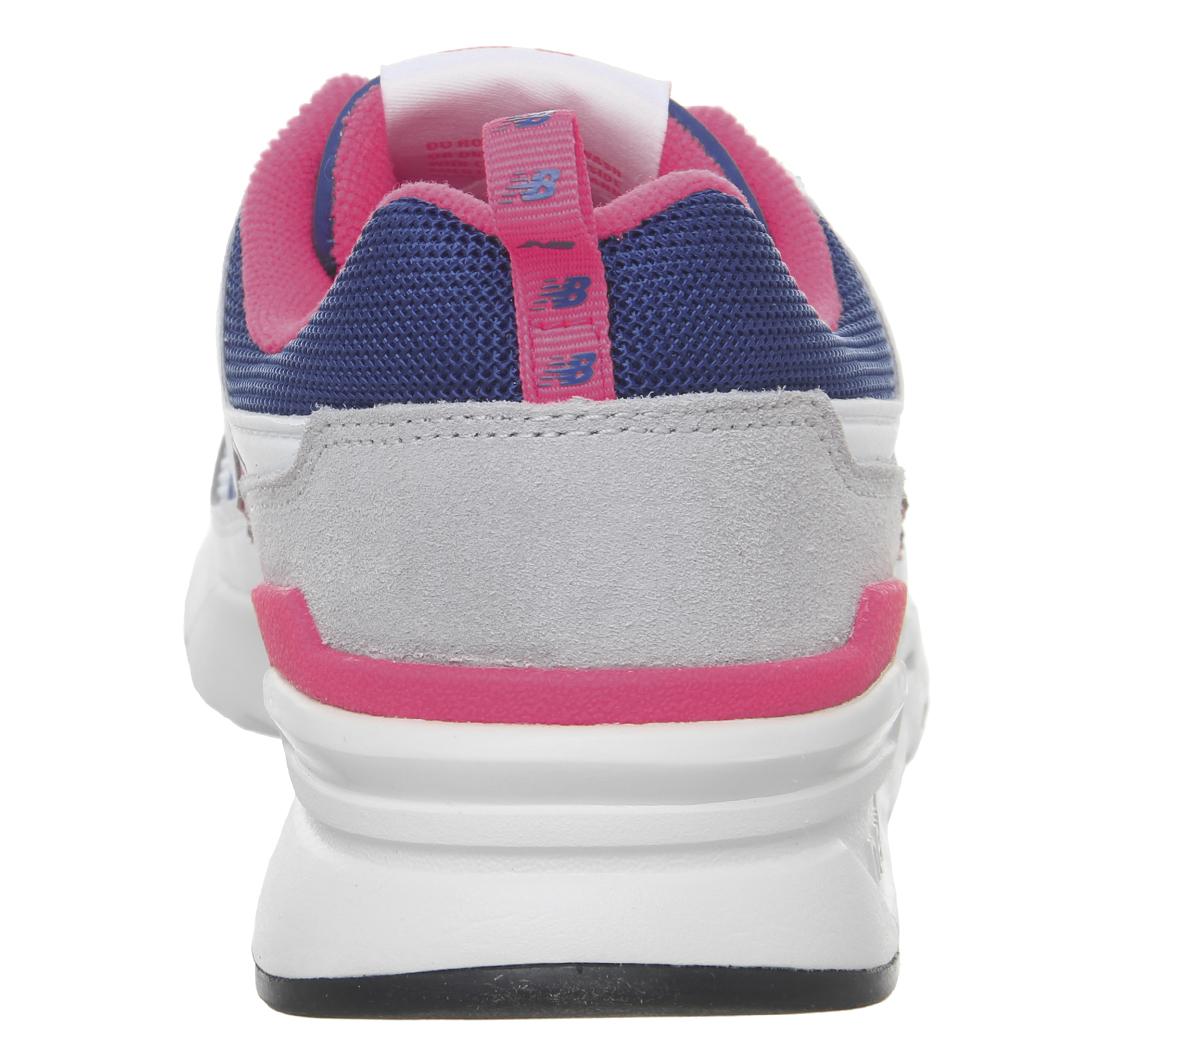 New Balance 997 Trainers White Laser Blue - Women's Trainers